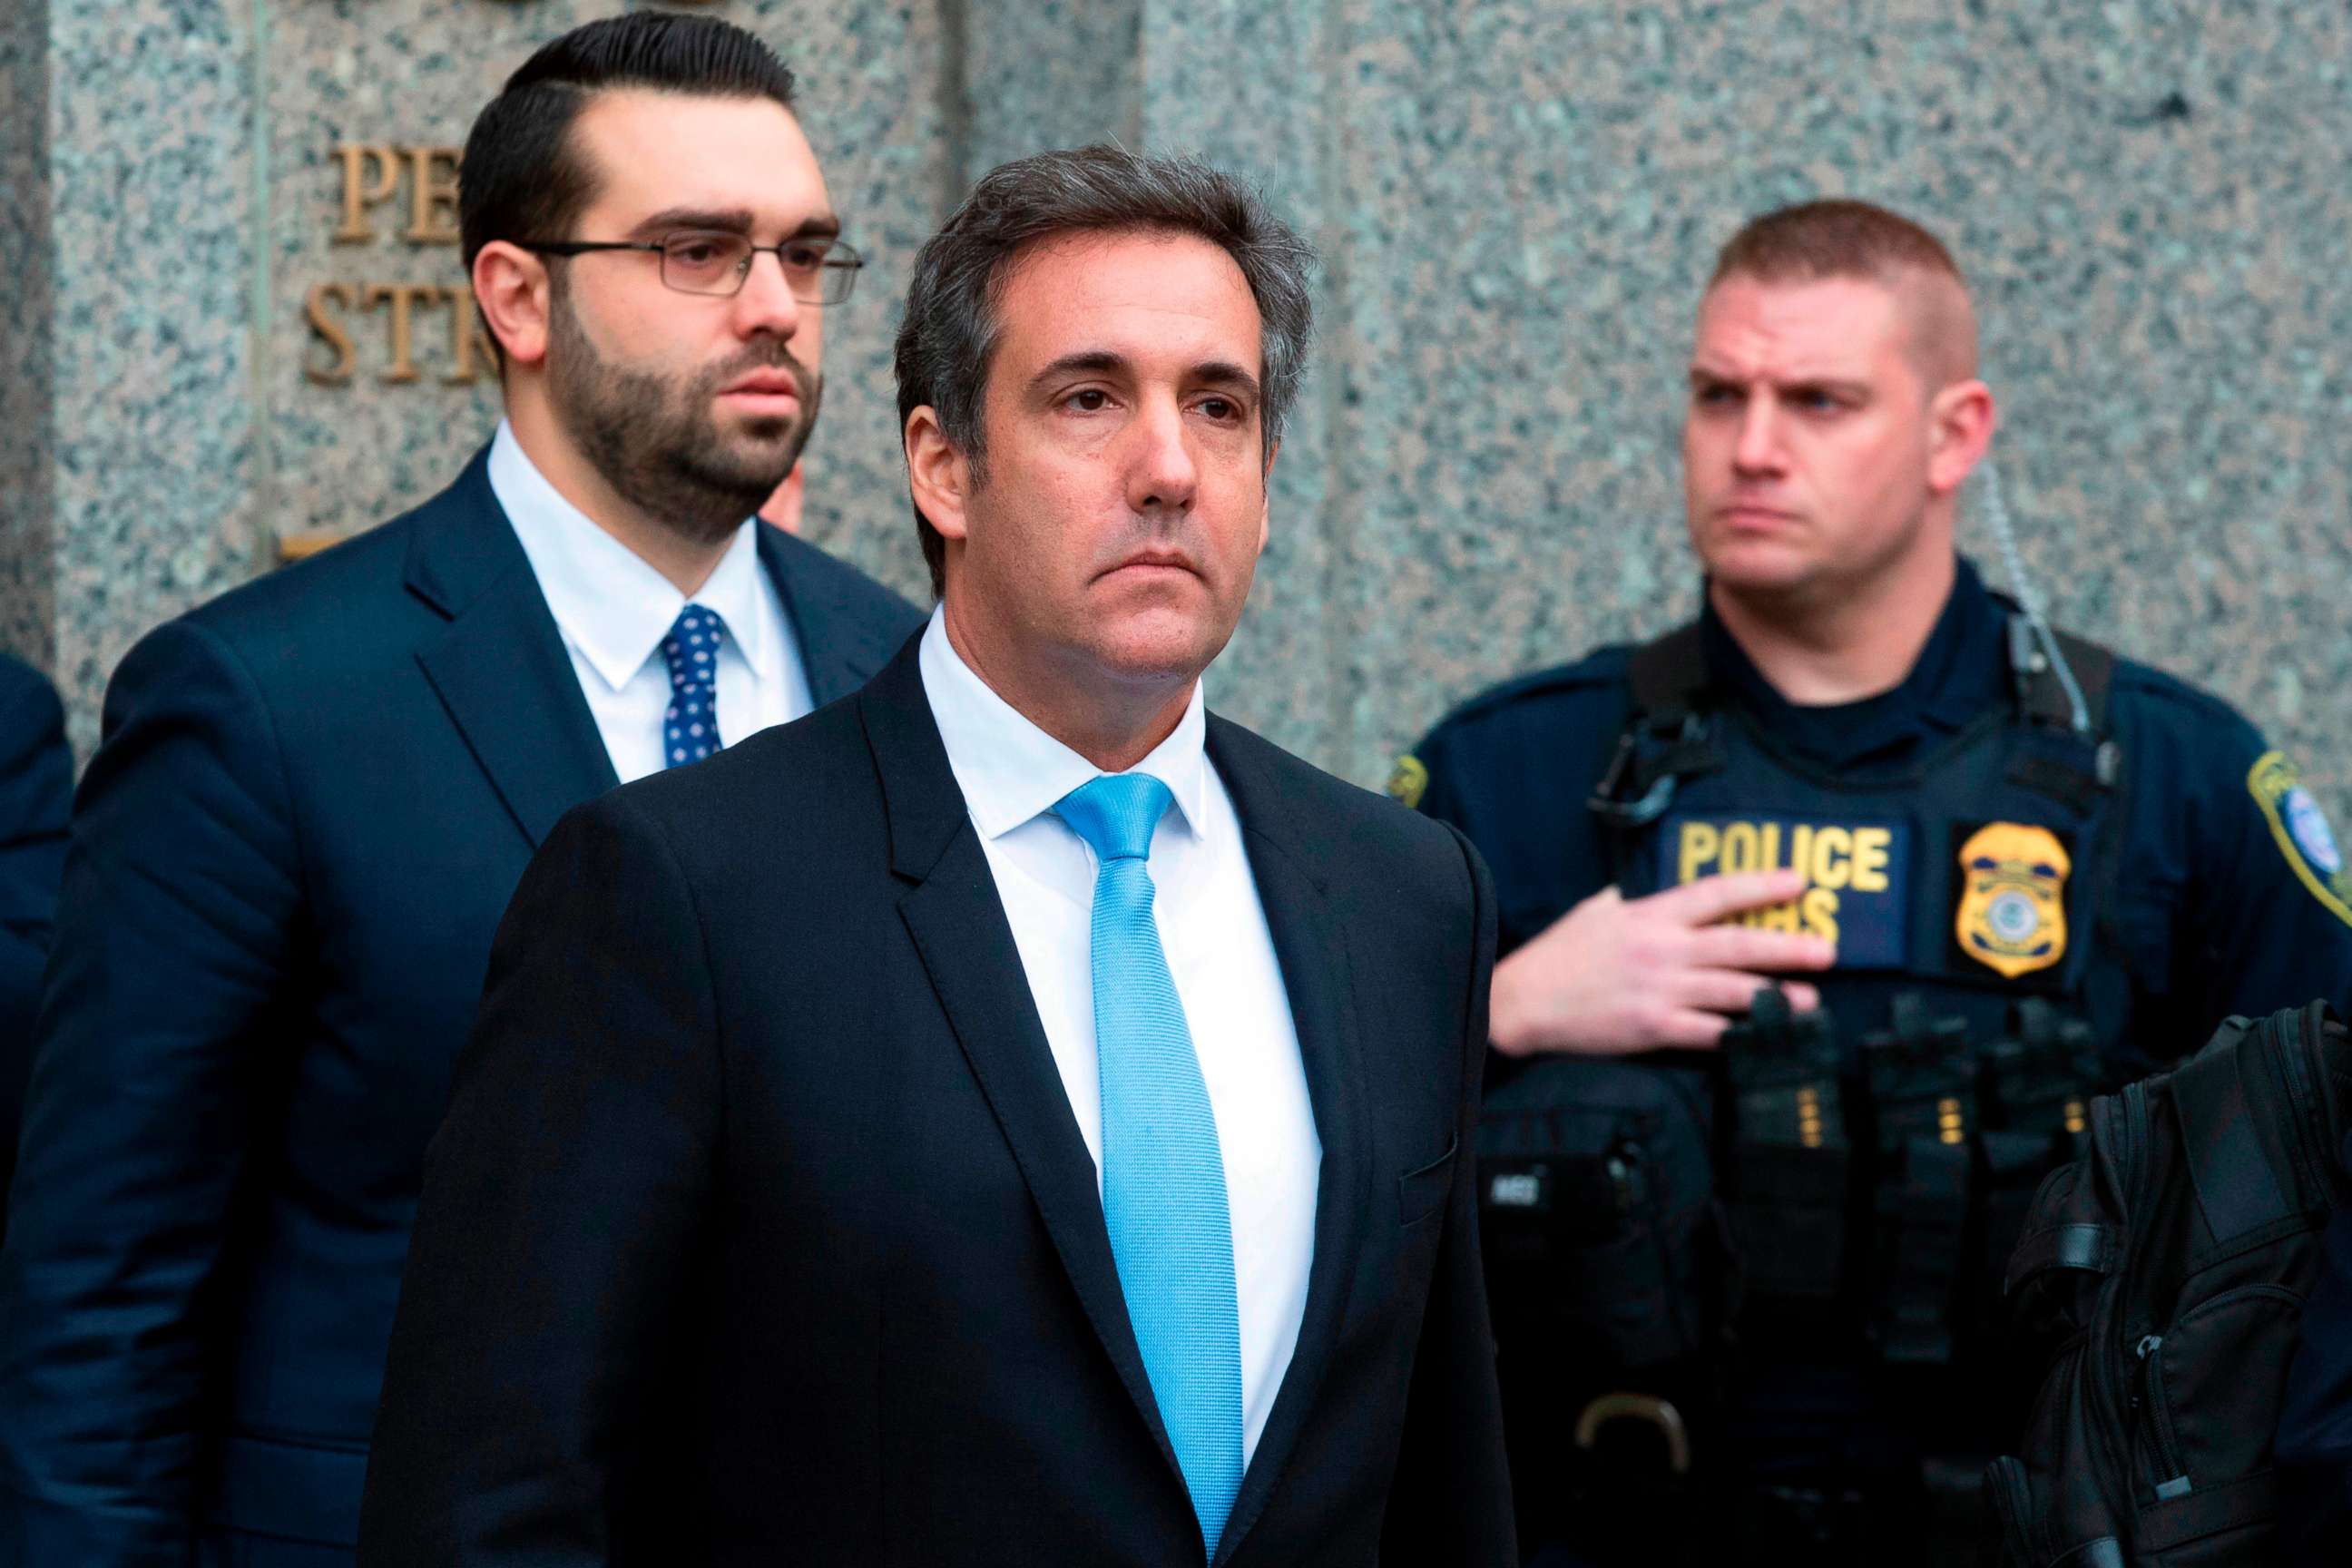 PHOTO: Michael Cohen, President Donald Trump's personal attorney, center, leaves federal court, in New York, April 16, 2018.